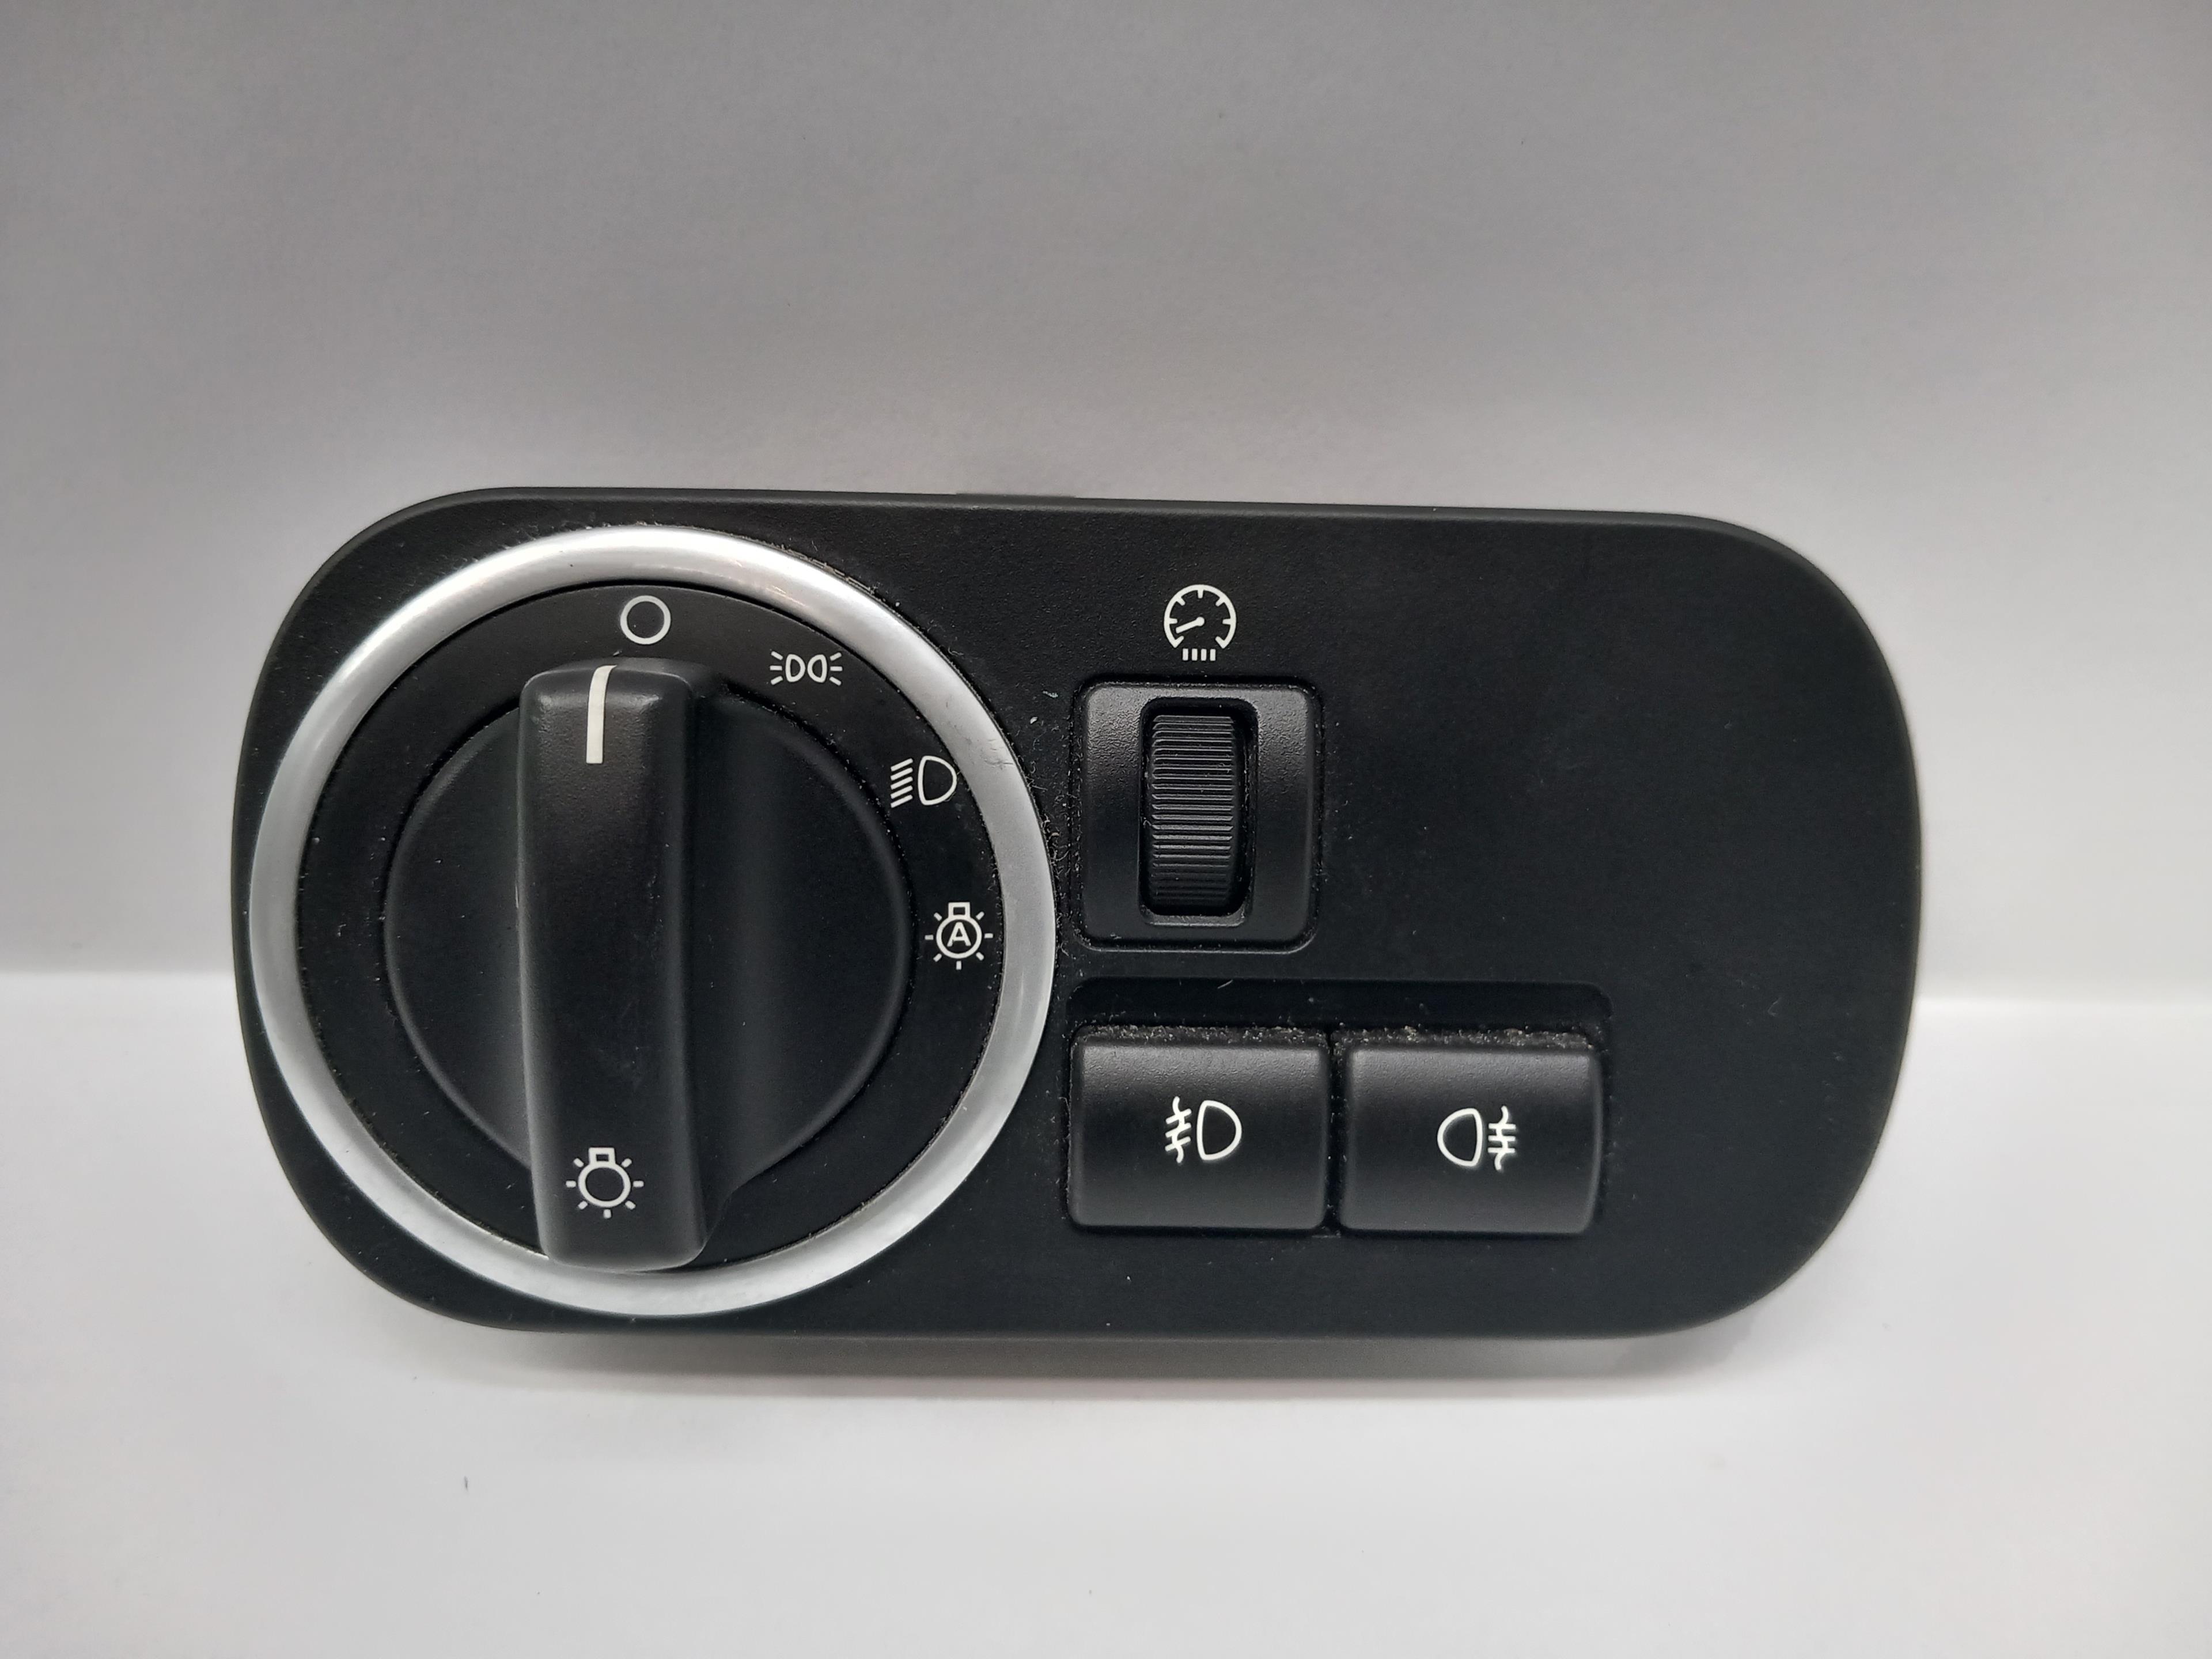 LAND ROVER Discovery 4 generation (2009-2016) Headlight Switch Control Unit LR010876 24026493